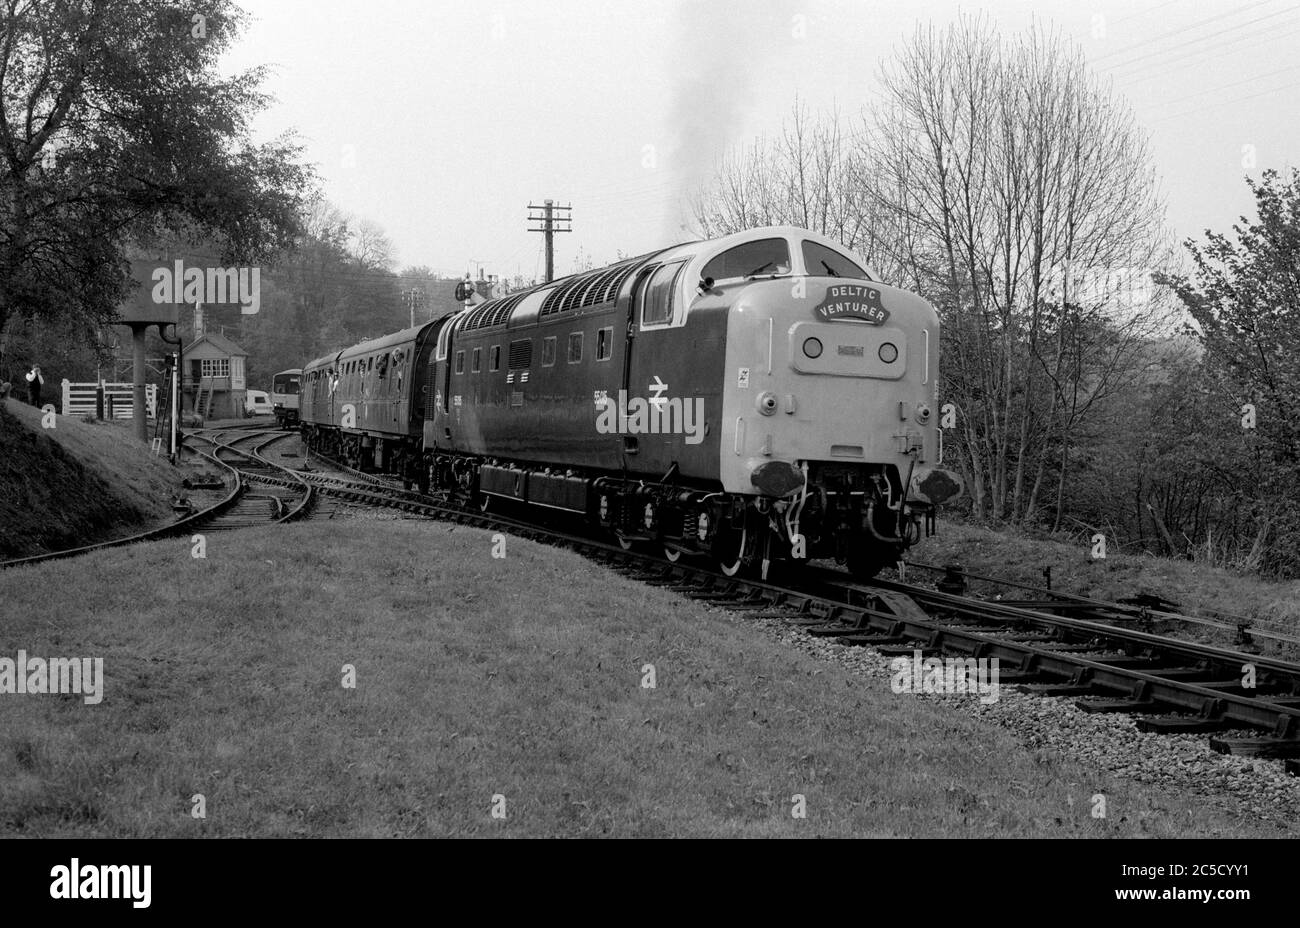 Class 55 diesel locomotive Deltic No. 55015 'Tulyar' at the Severn Valley Railway diesel gala, Arley, Worcestershire, UK. 1987. Stock Photo